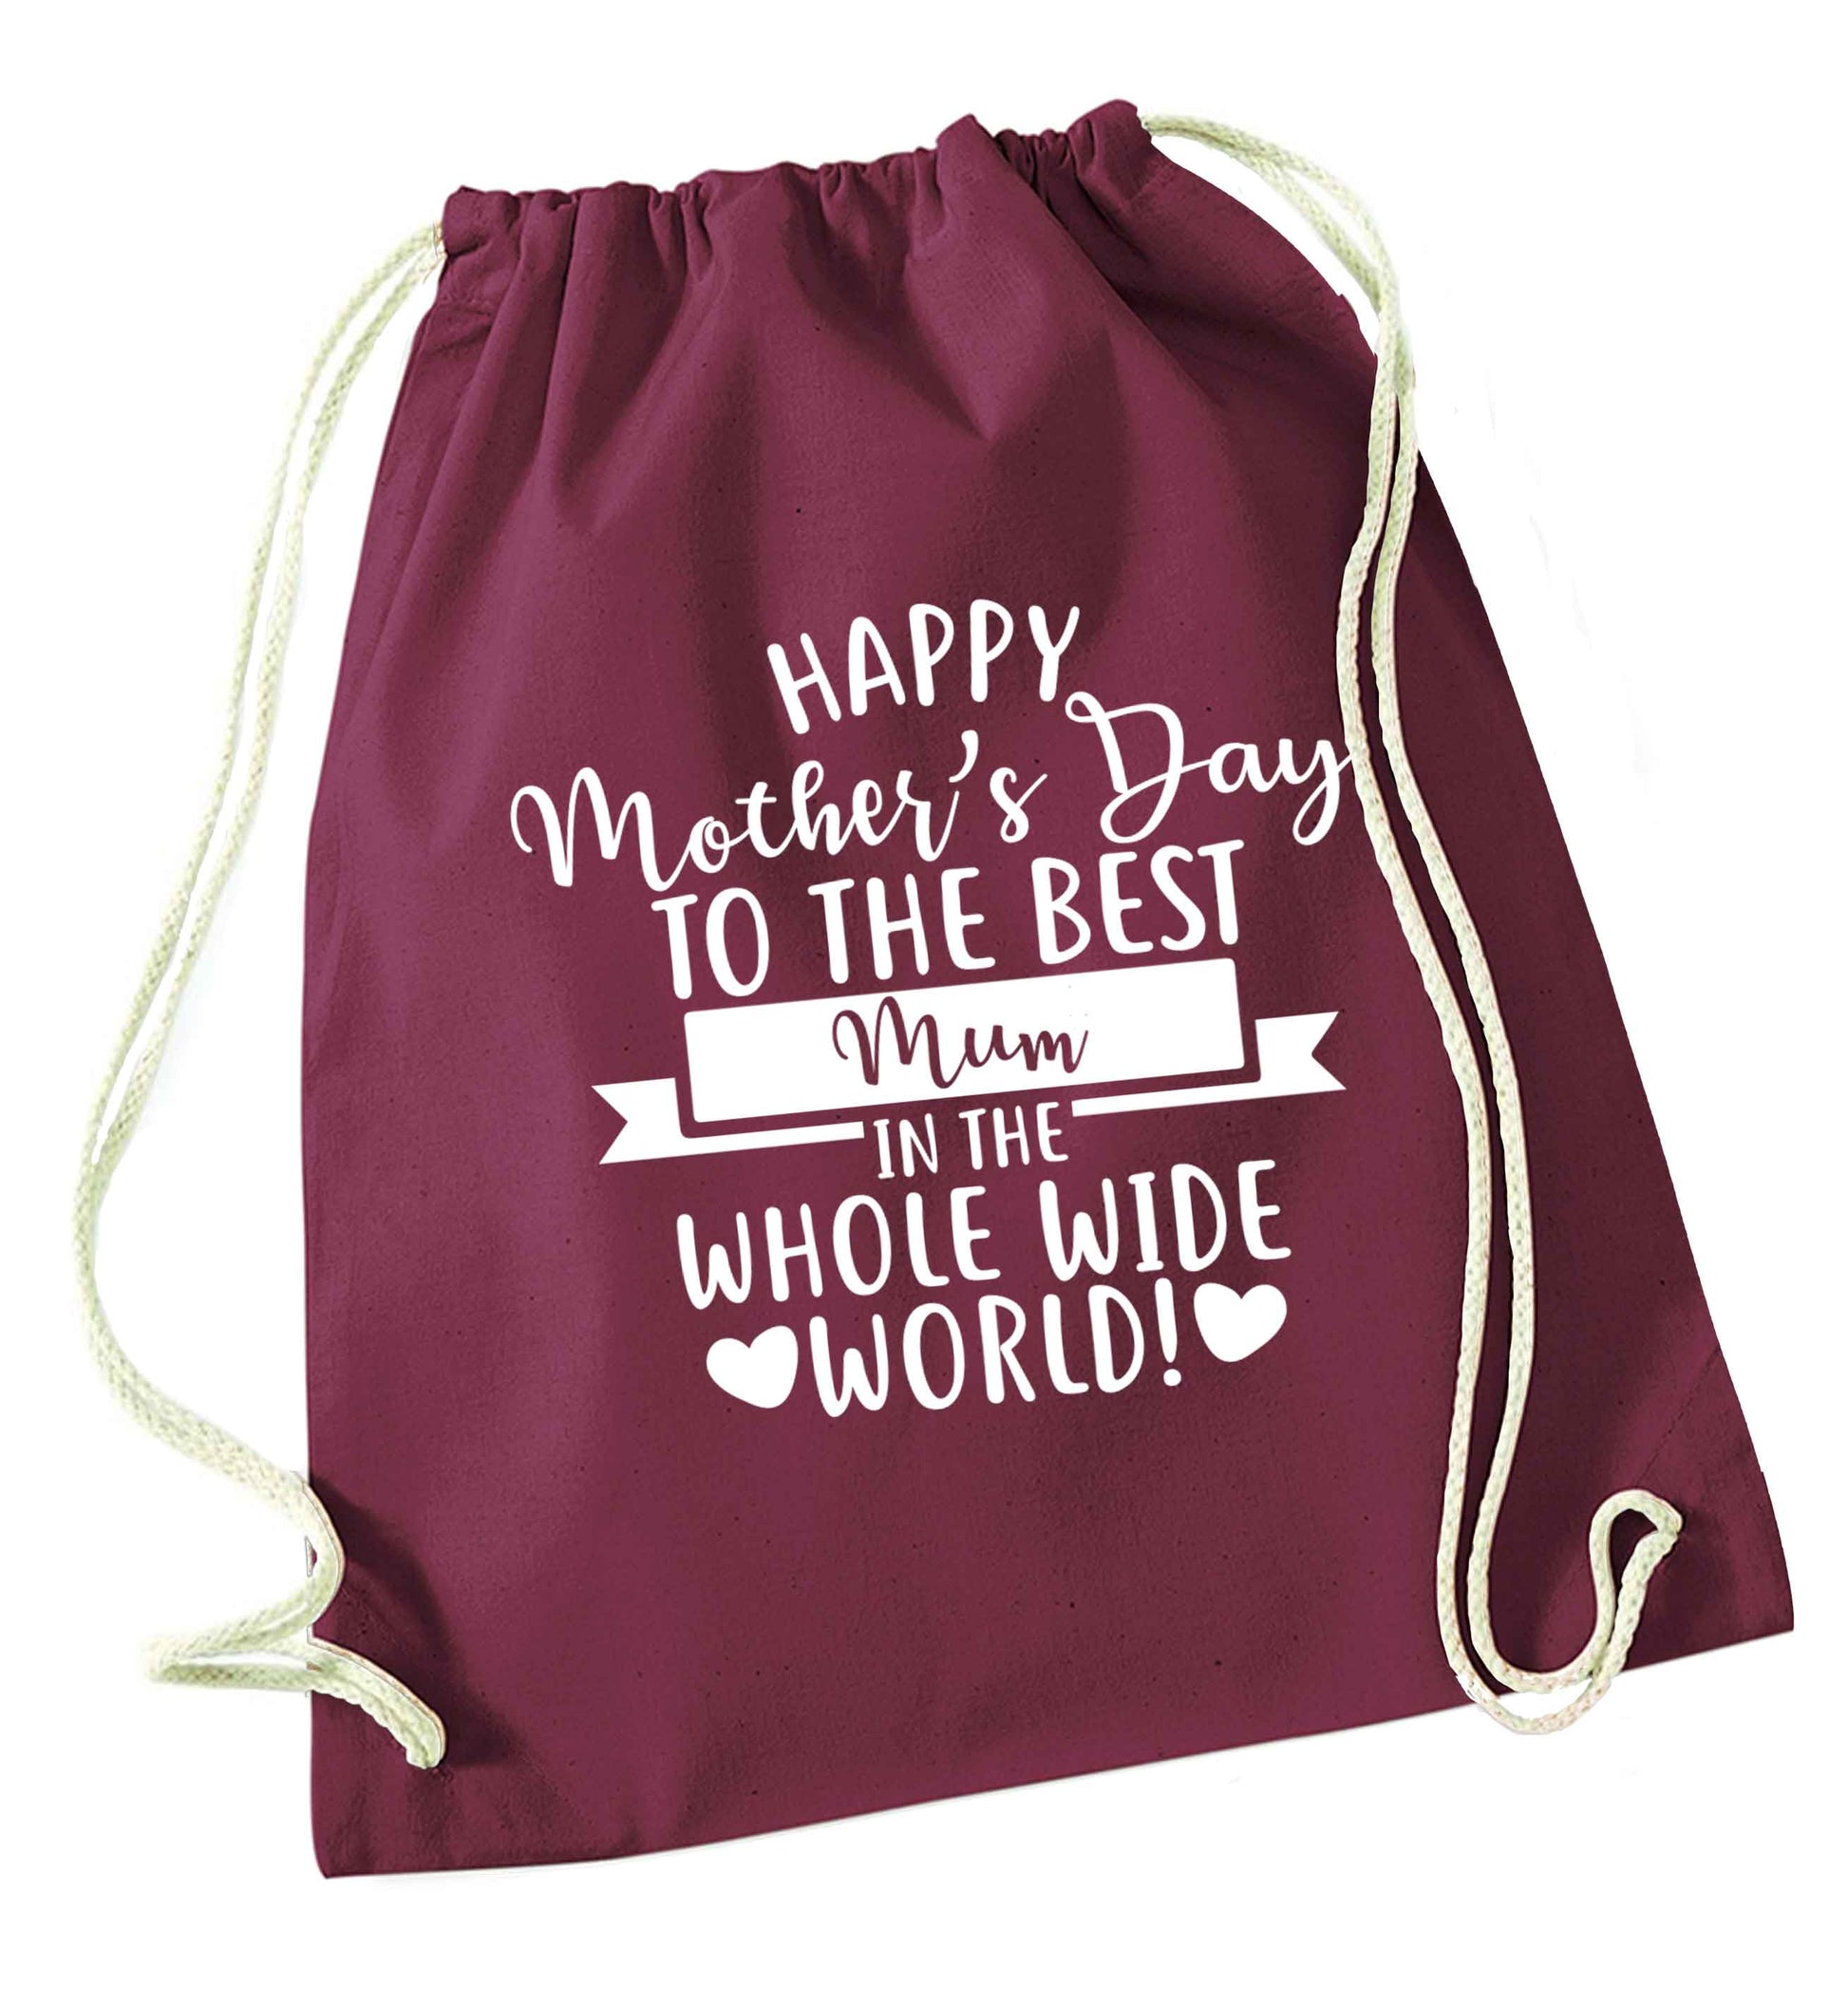 Happy mother's day to the best mum in the world maroon drawstring bag